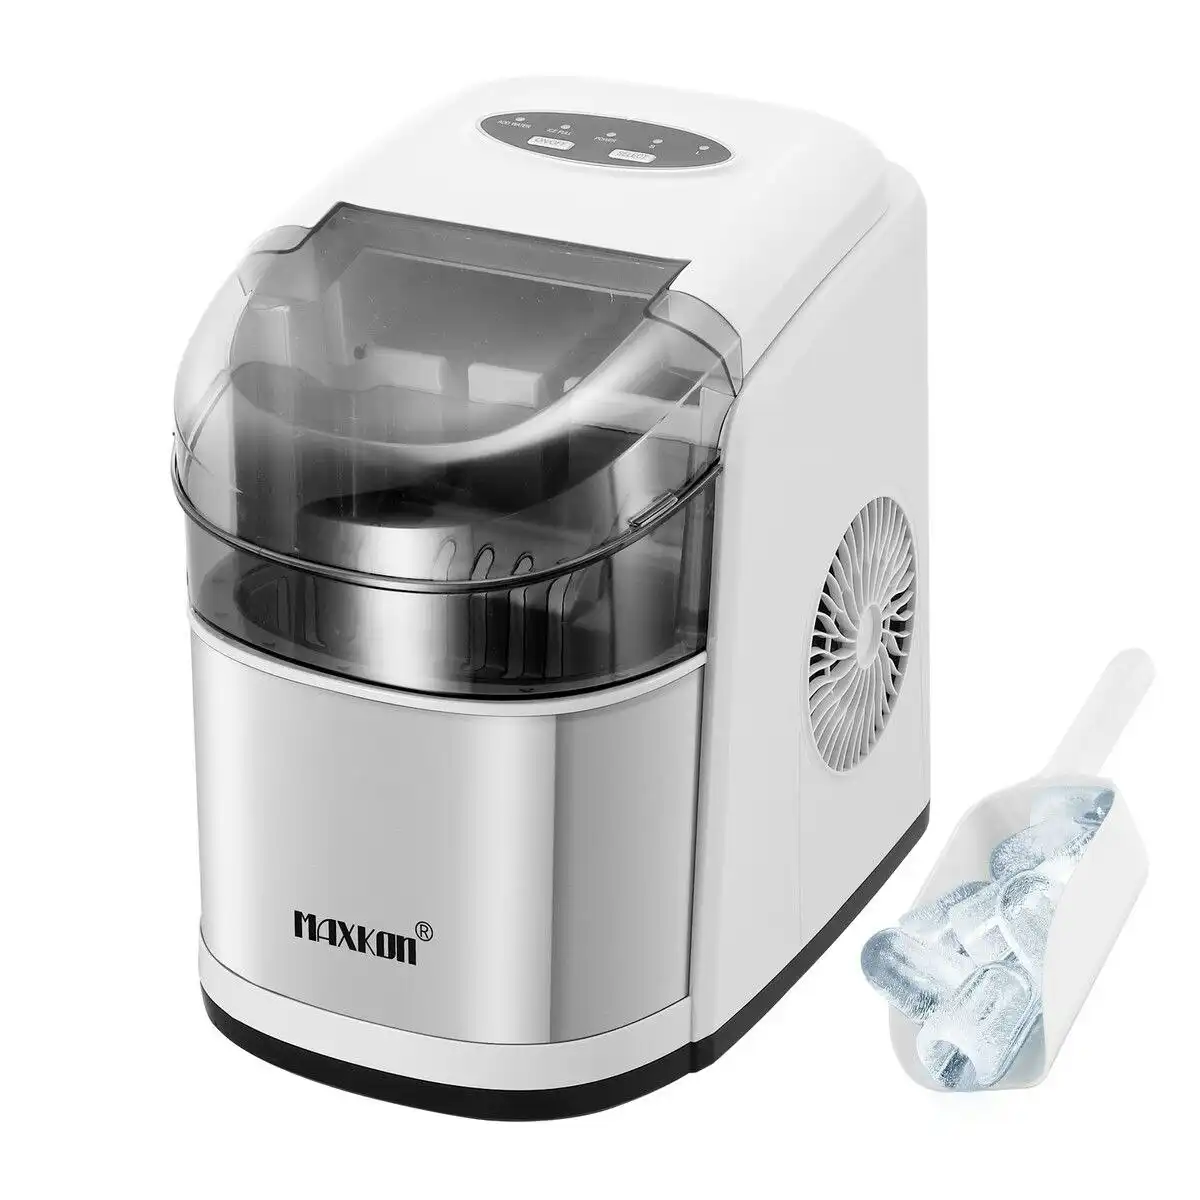 Maxkon 12KG Ice Maker Machine Bullet Shaped Cube Making Countertop Home Commercial Automatic Quiet